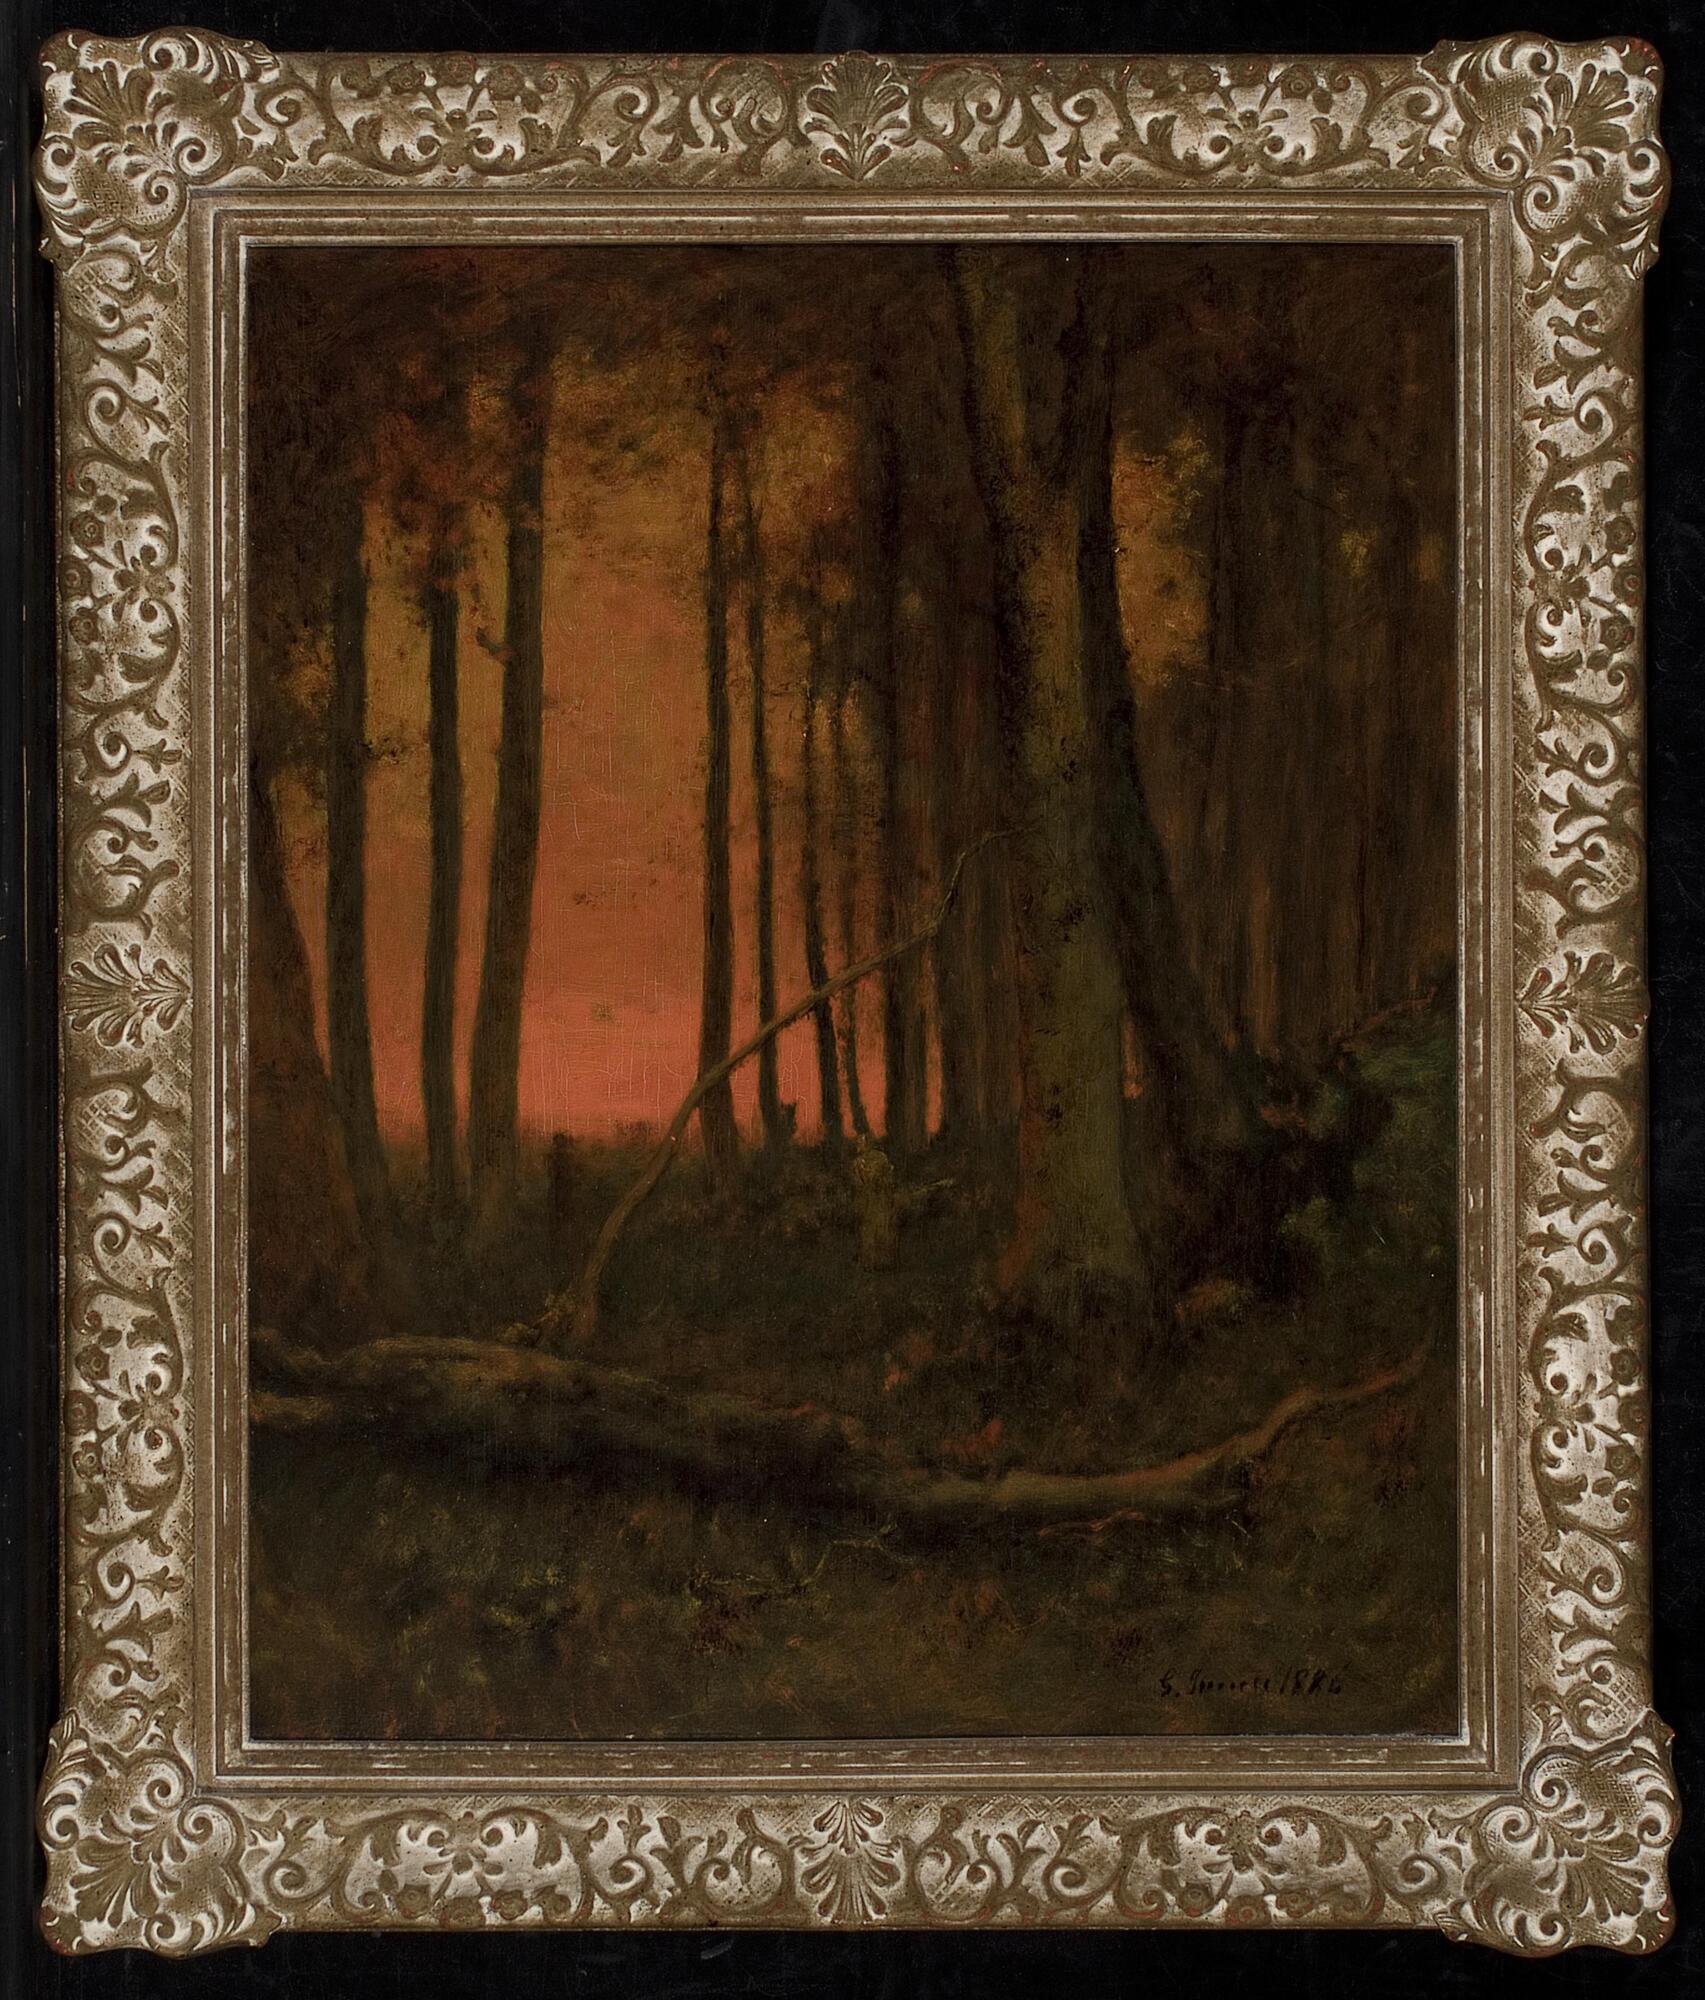 Landscape scene depicting trees silhouetted against a reddening sky with a dead fallen tree trunk lying diagonally across the foreground.